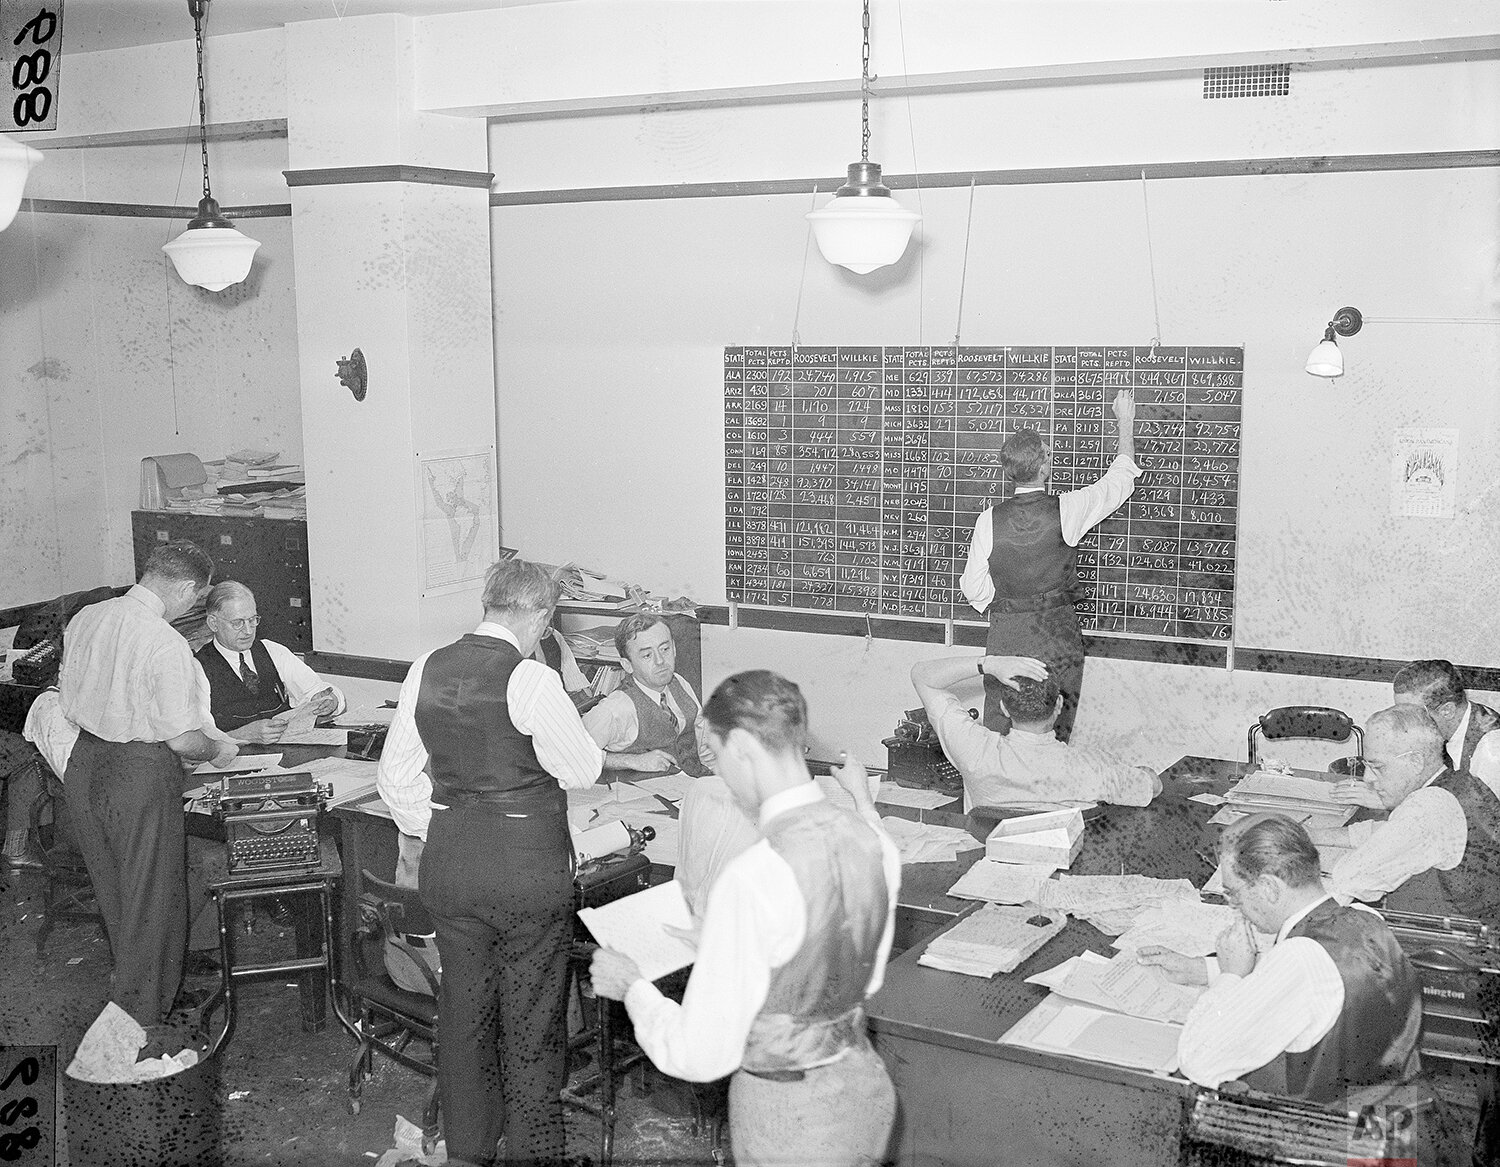  Associate Press journalists in the Washington bureau tabulate election returns, Nov. 5, 1940, keeping the score on both electoral and popular votes for the nation. The staff handled returns which flooded in over an 85,000-mile wire network. Standing